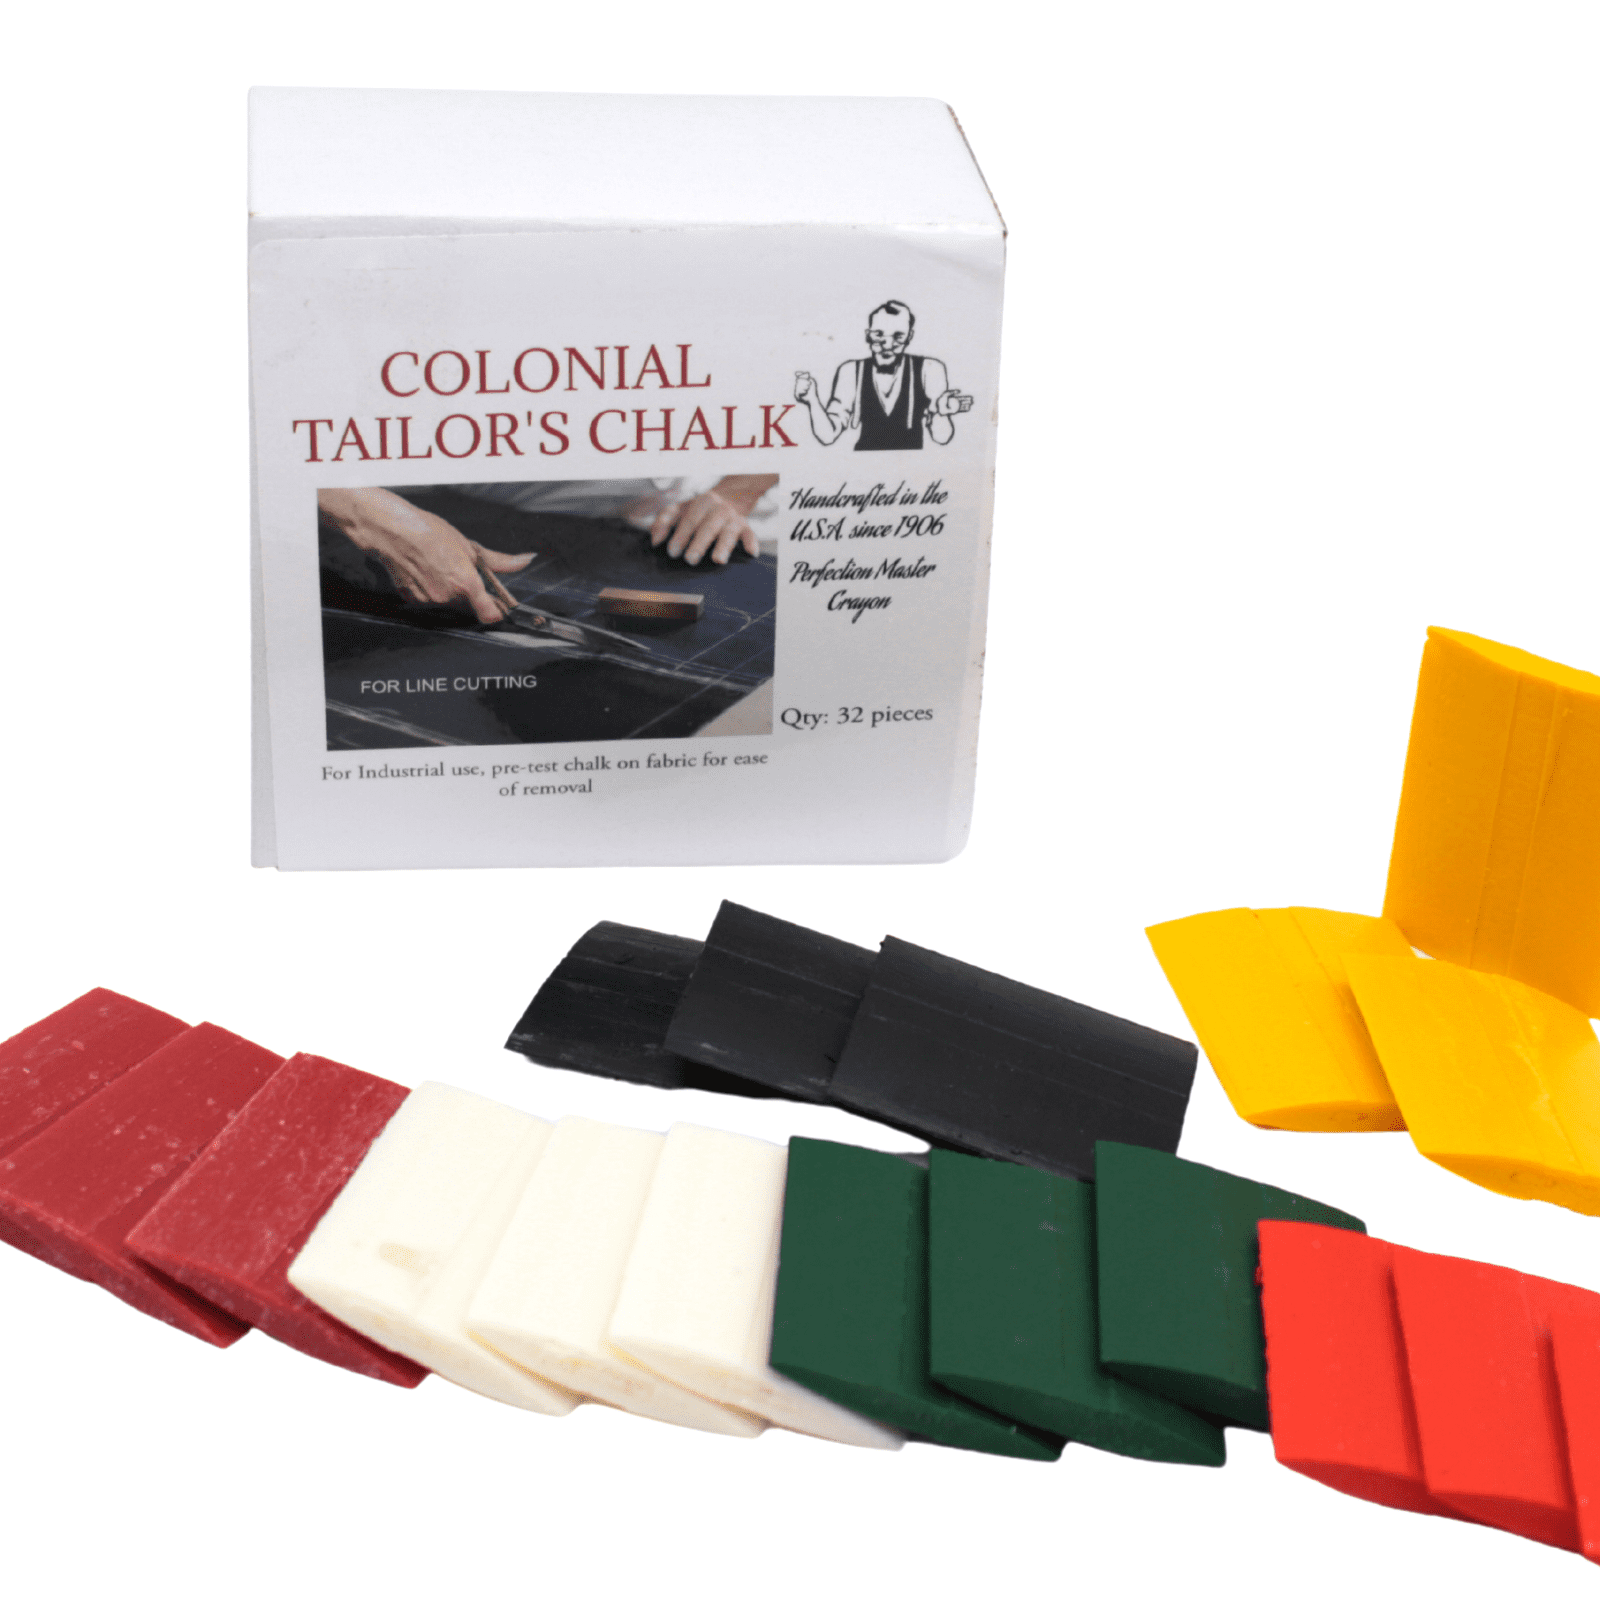 Sewing Chalk For Fabric | Professional Triangle Tailor Chalks, Fabric  Markers For Sewing, Fabric Chalk Sewing Wax Based Tailor's Chalk